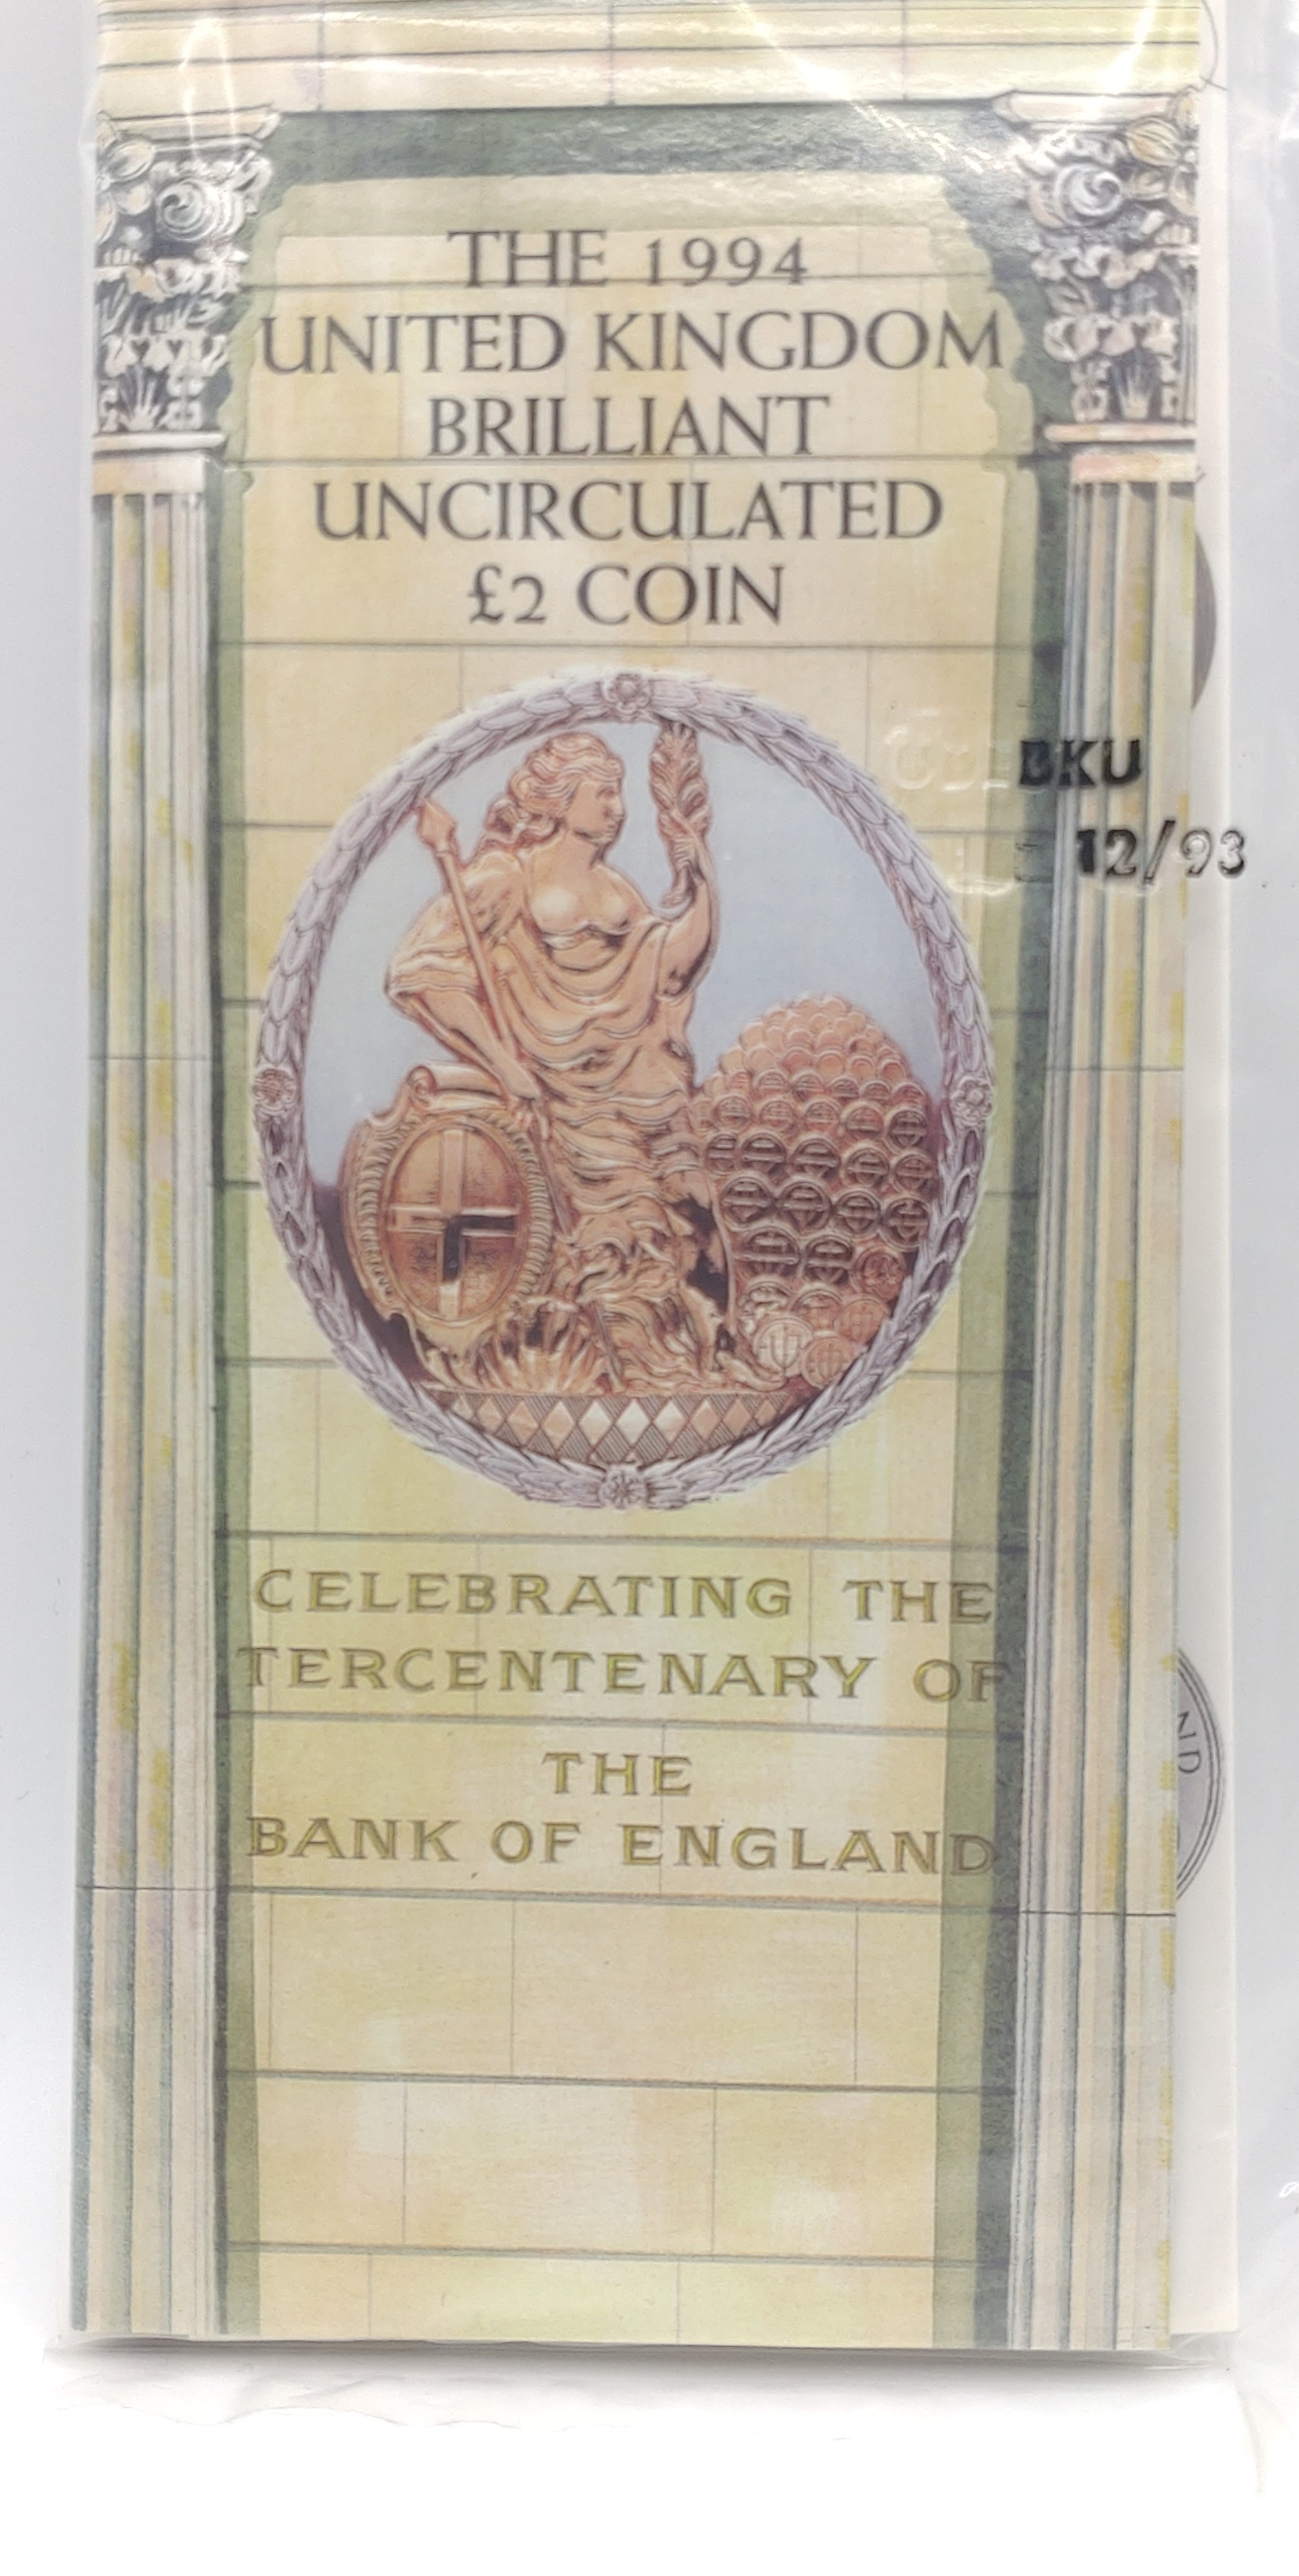 £2 coin. 300 years of Bank of England 1994